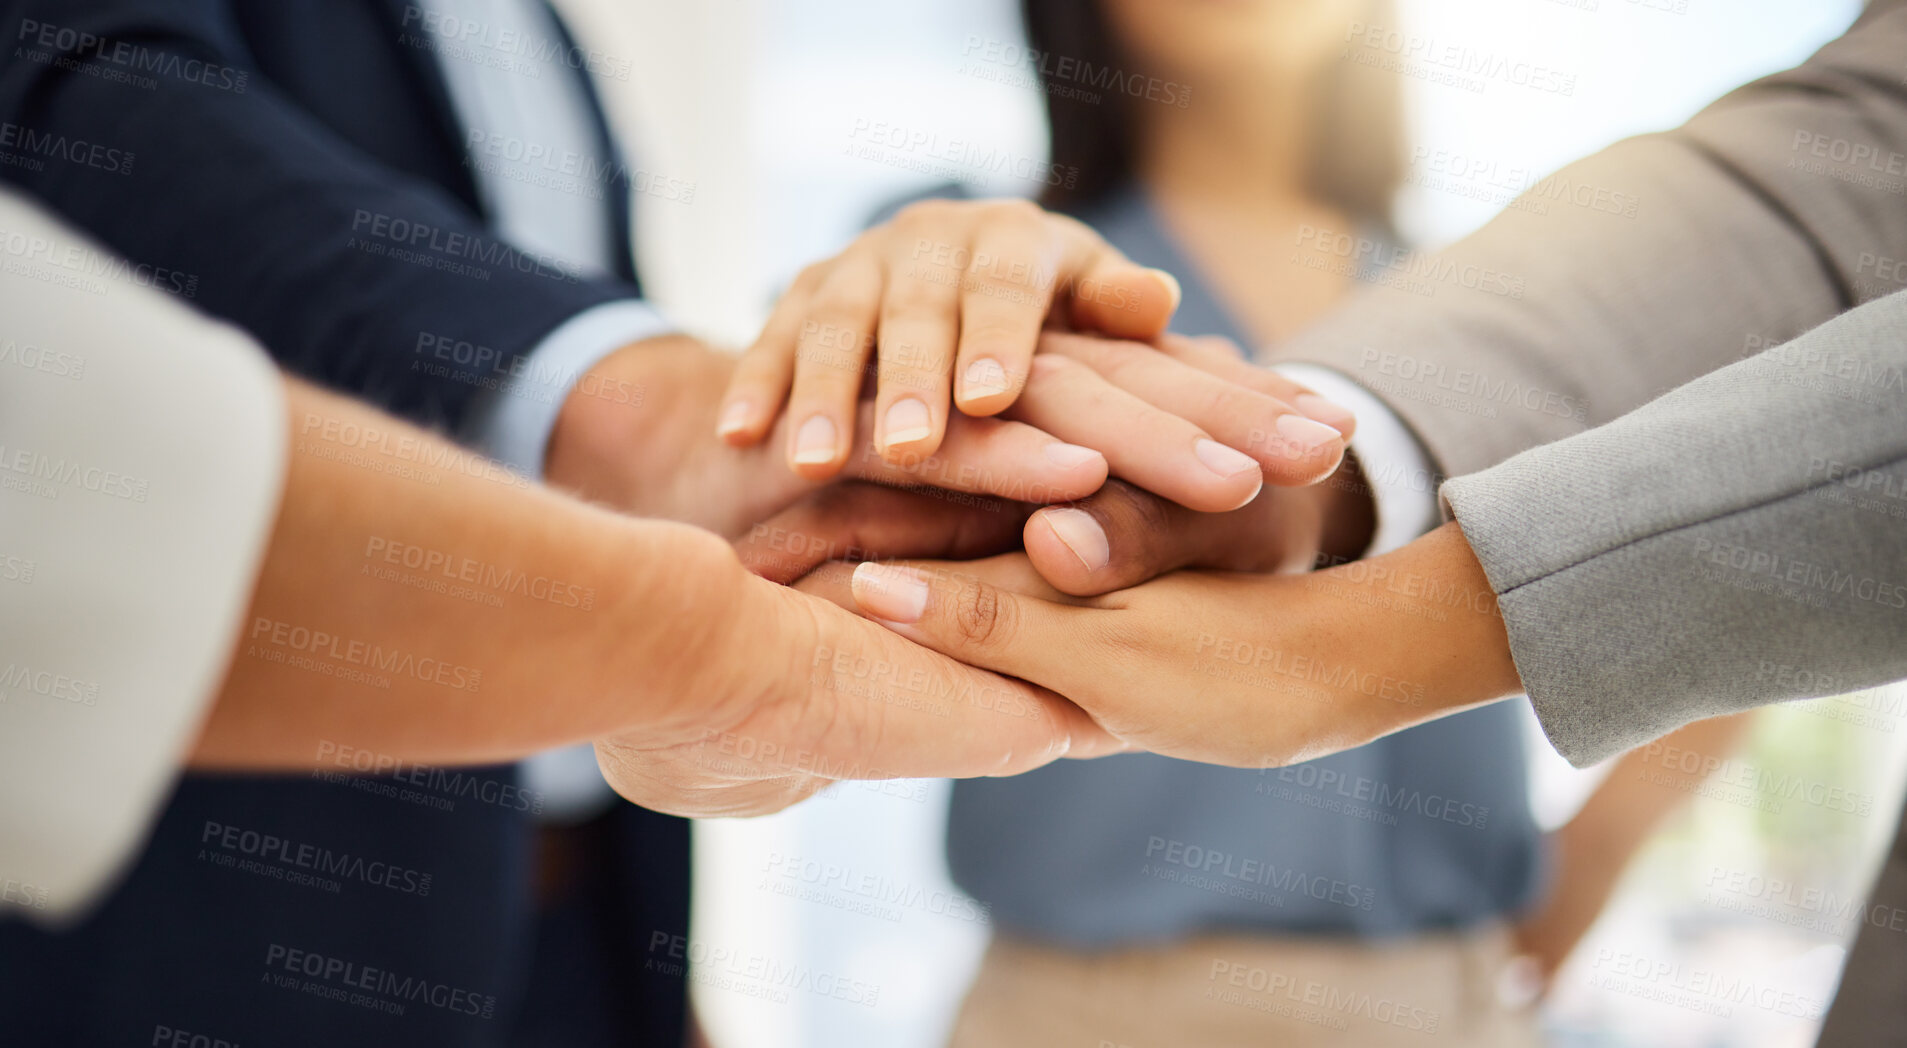 Buy stock photo Support, business people collaboration and hands stack together in solidarity, trust and teamwork cooperation. Community, team building mission and professional employee team united for group project